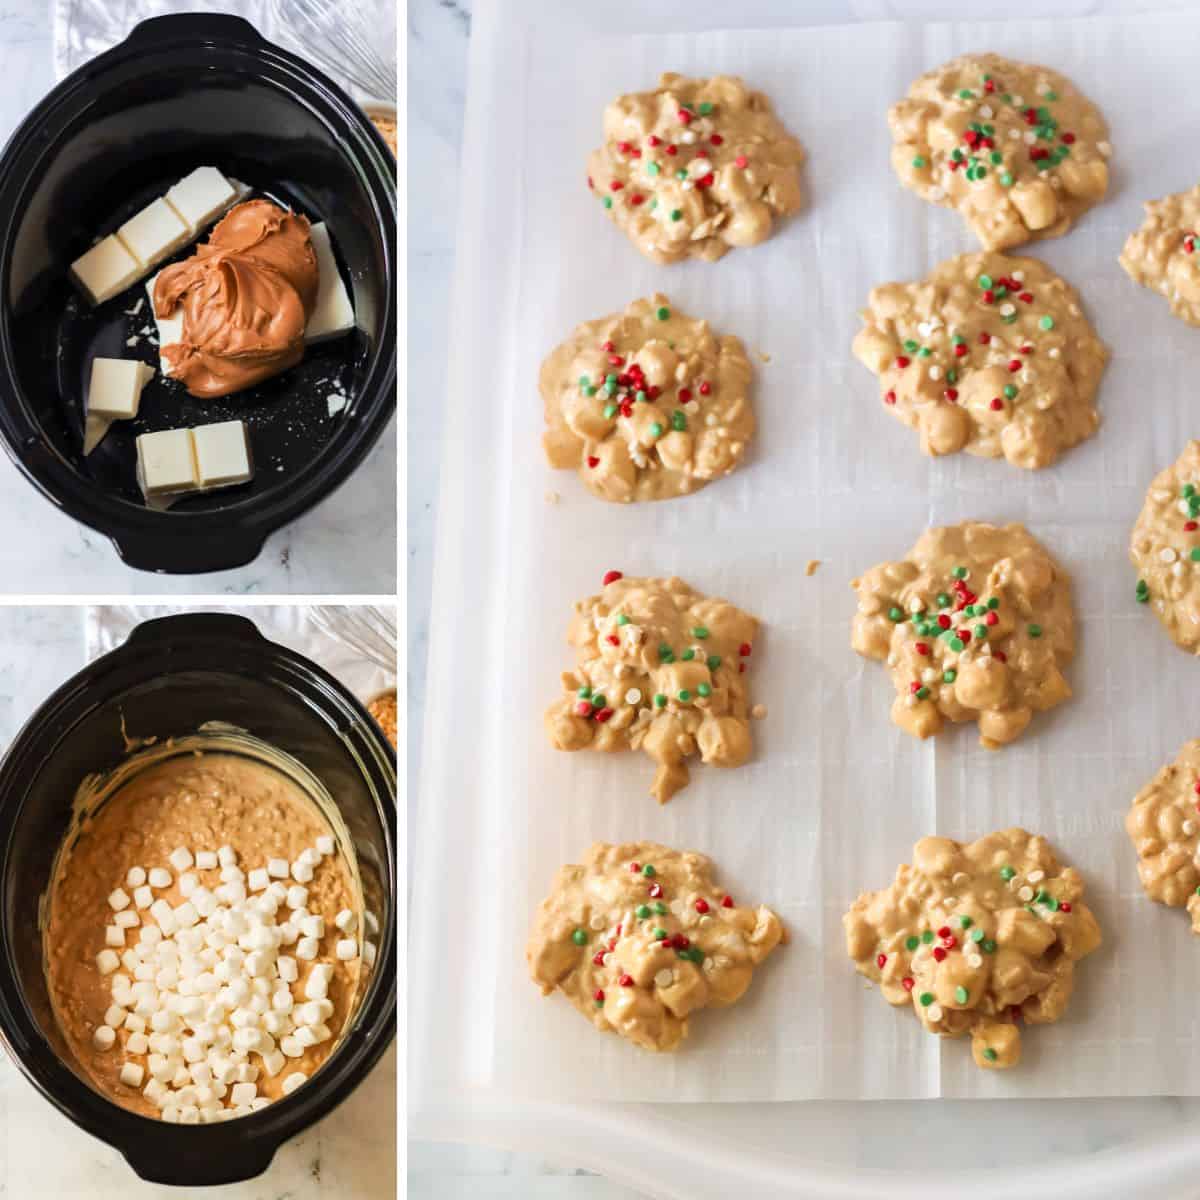 Three image collage of steps to make avalanche cookies: melt butter and peanut butter in crockpot, stir in cereal and marshmallows, and scoop onto parchment paper.